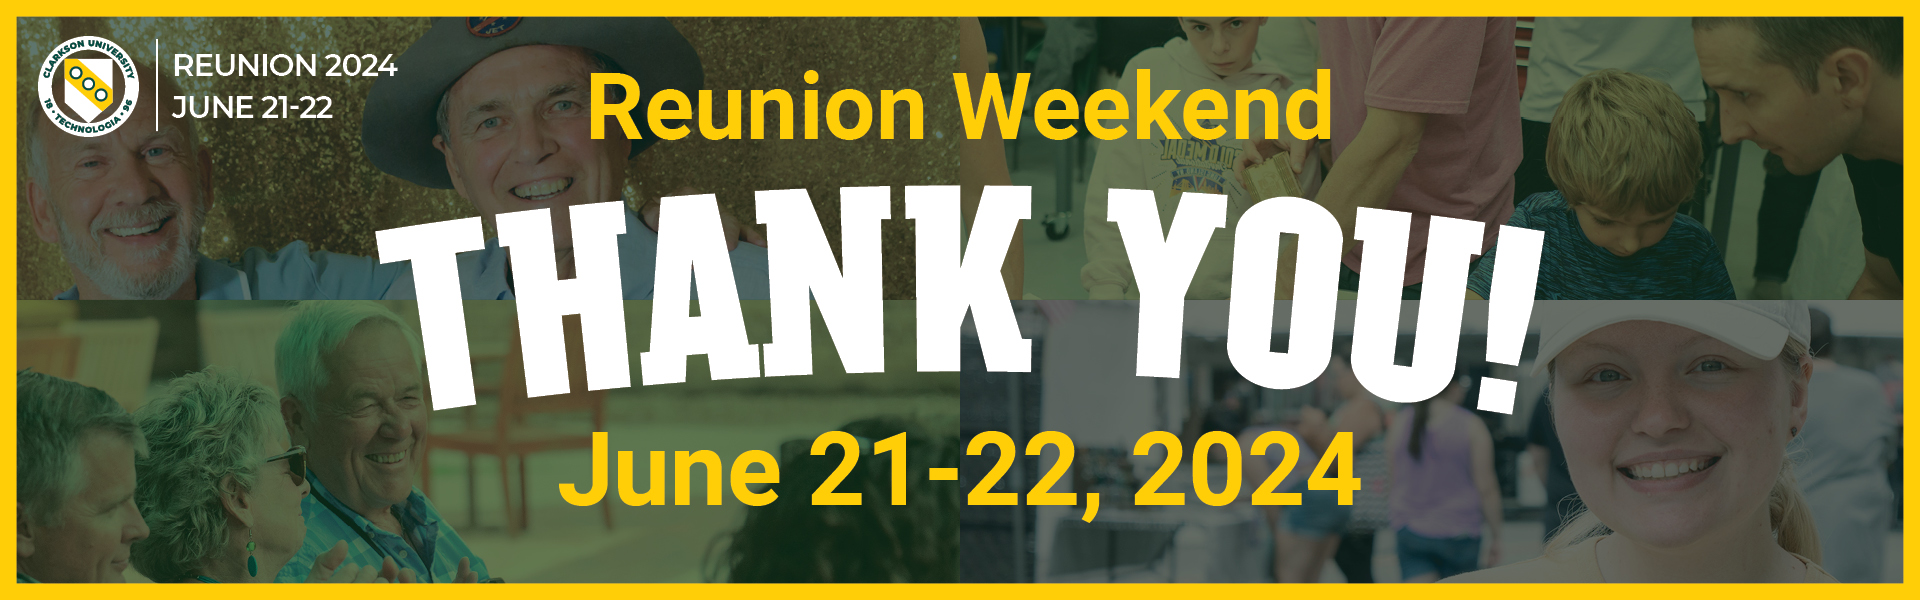 Thank you for coming to Reunion Weekend 2024!